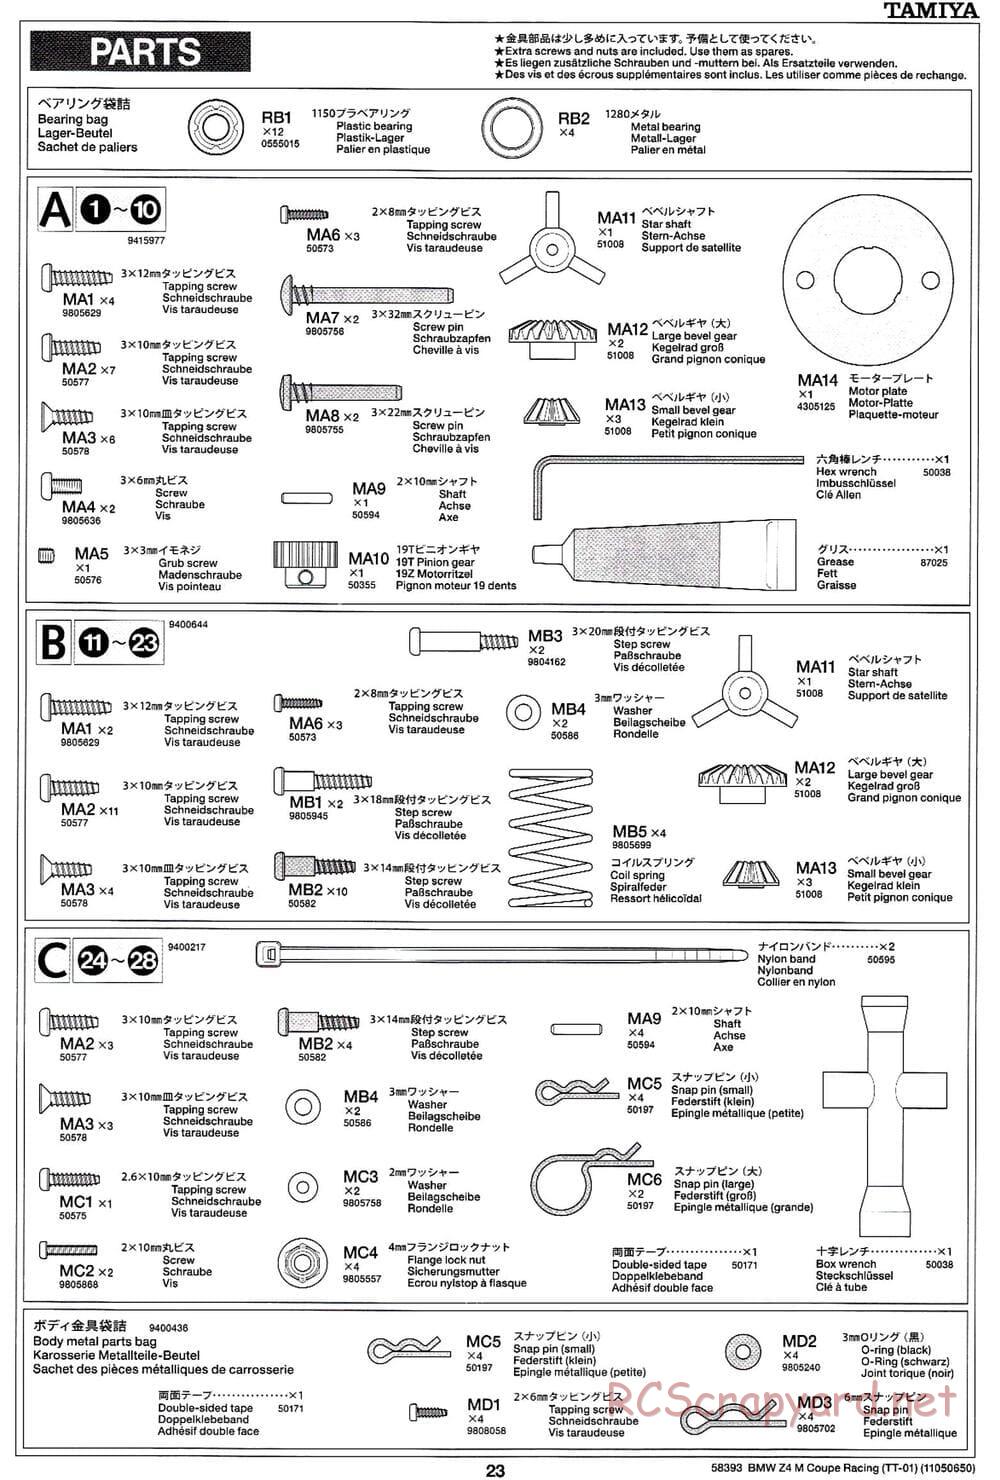 Tamiya - BMW Z4 M Coupe Racing - TT-01 Chassis - Manual - Page 23